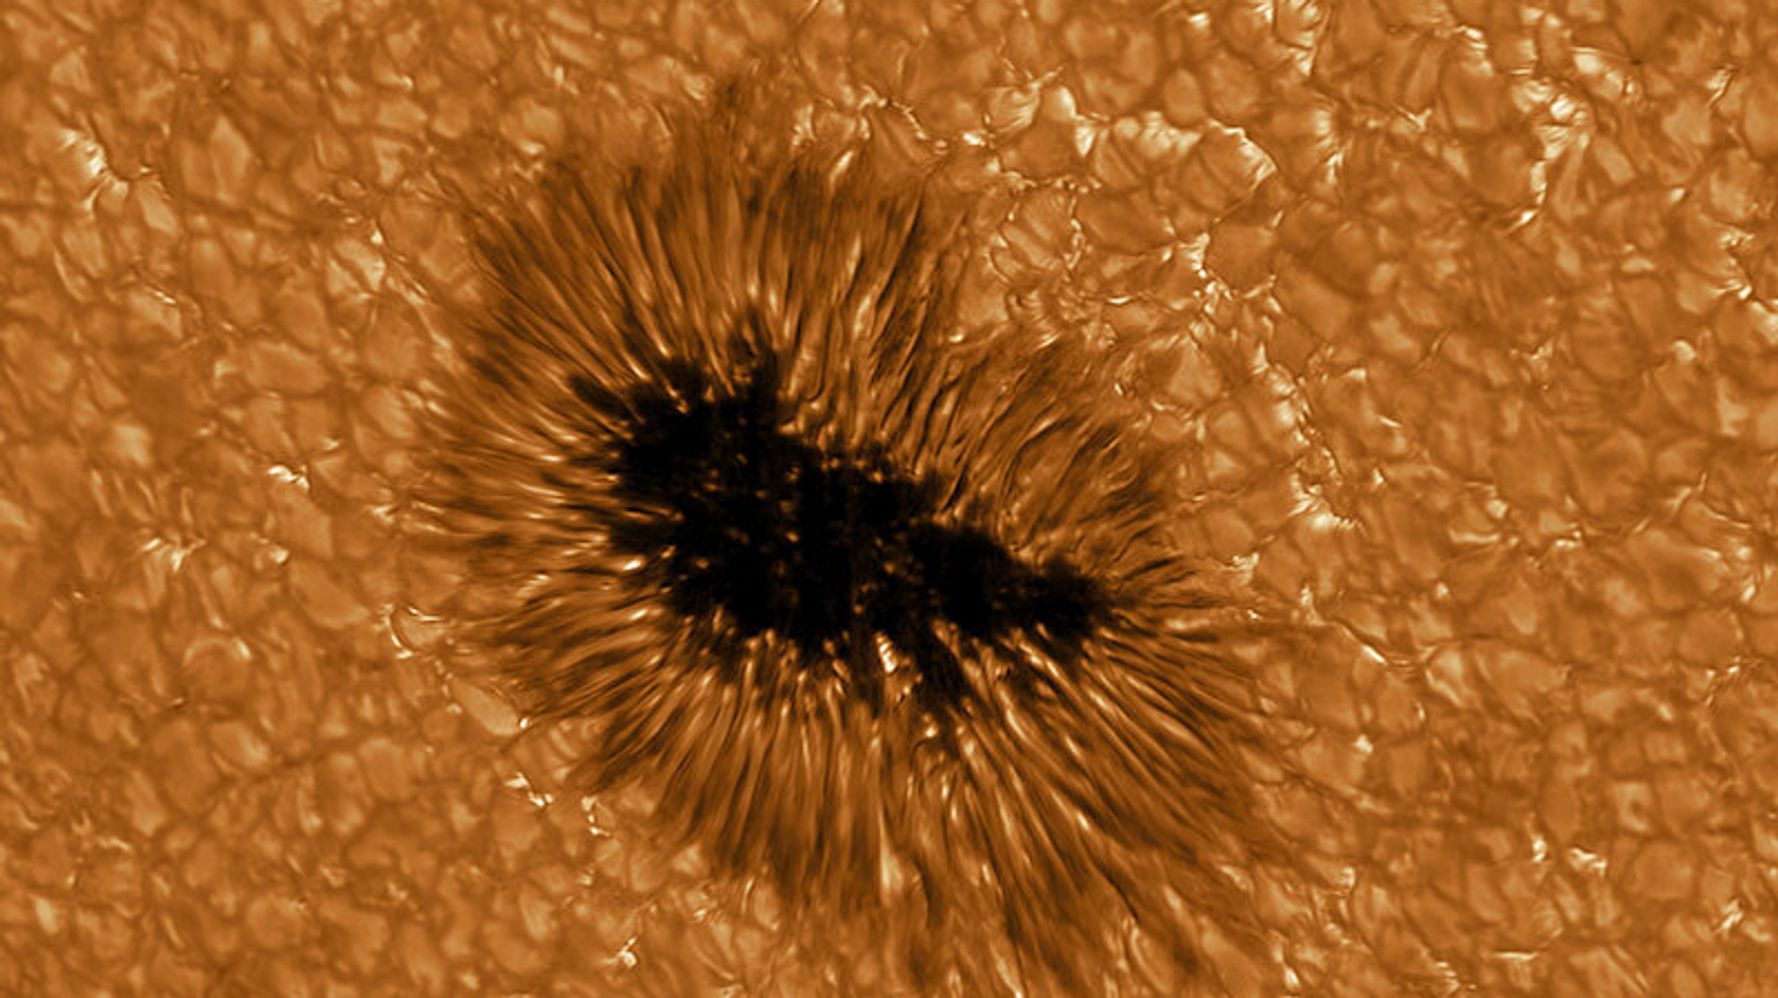 Gaze deep into a sunspot, courtesy of these Solar Telescope images